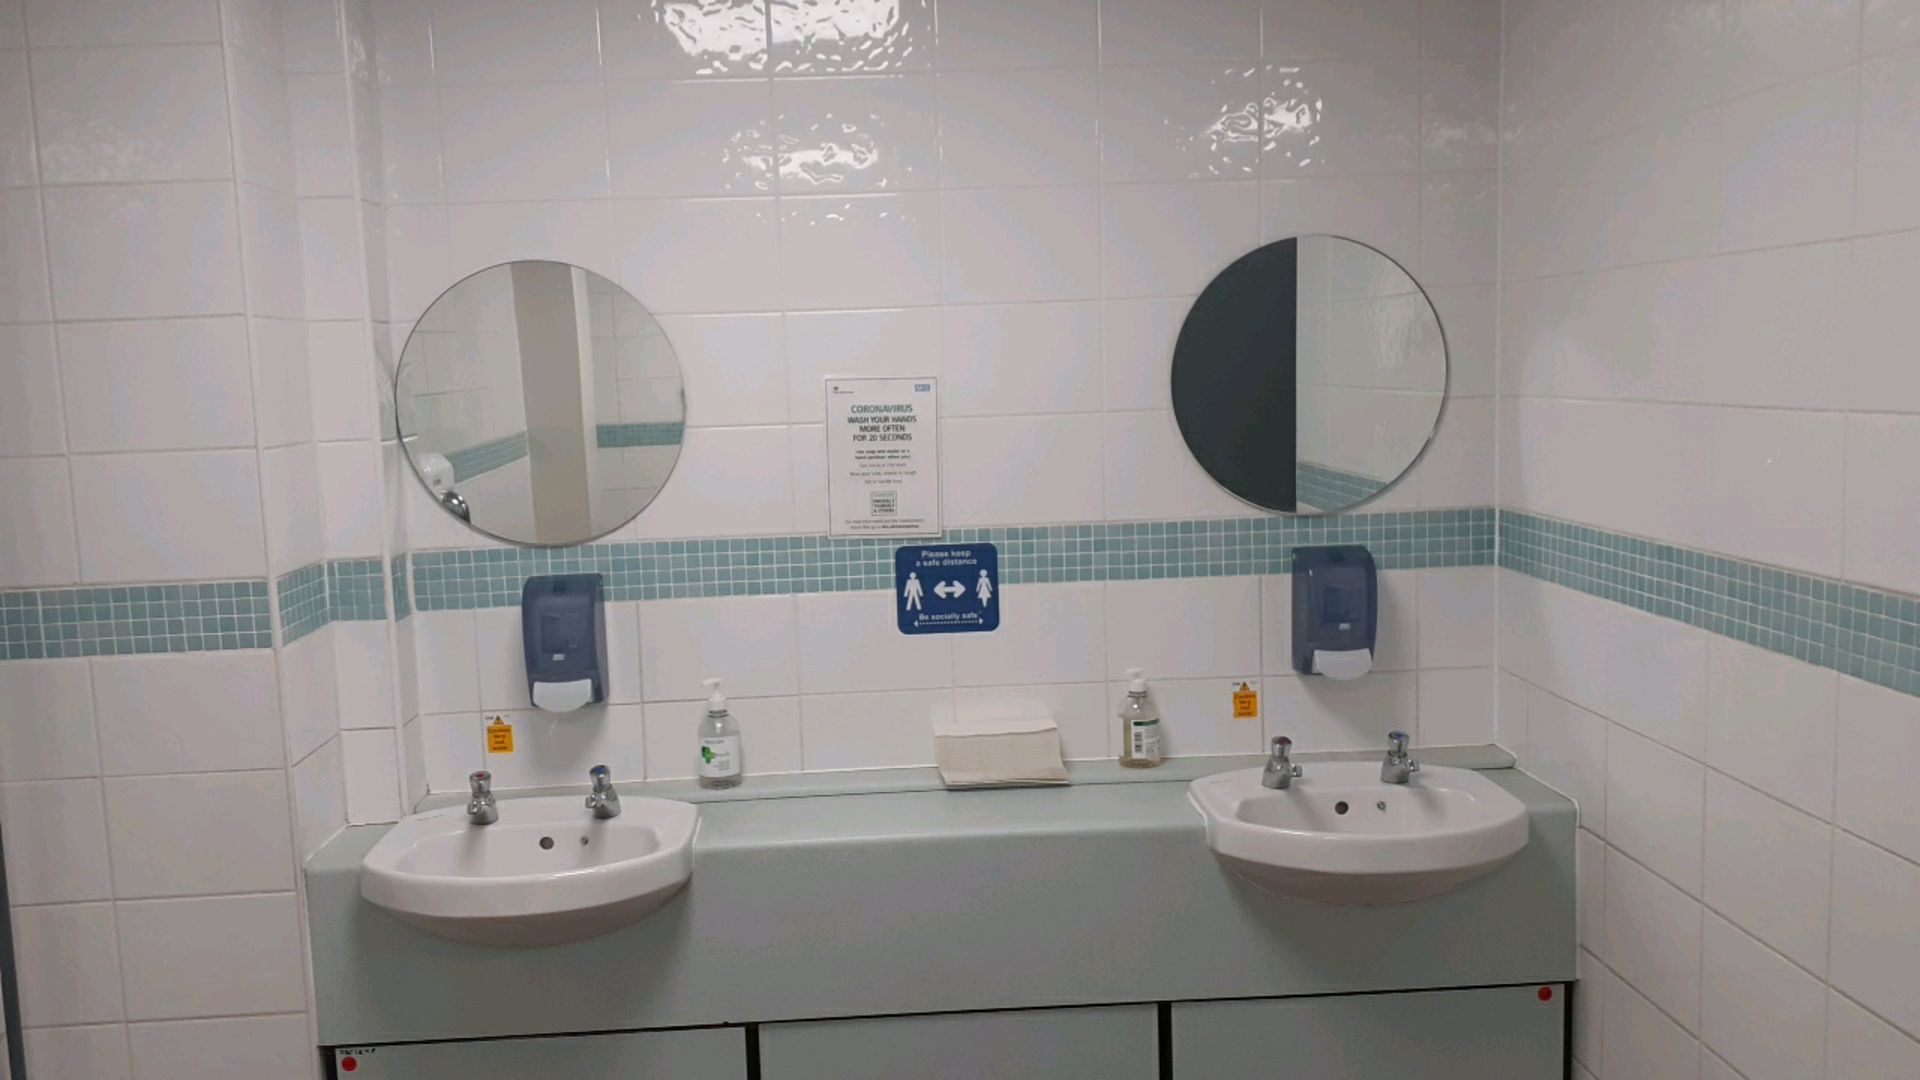 Male toilets - Image 3 of 4